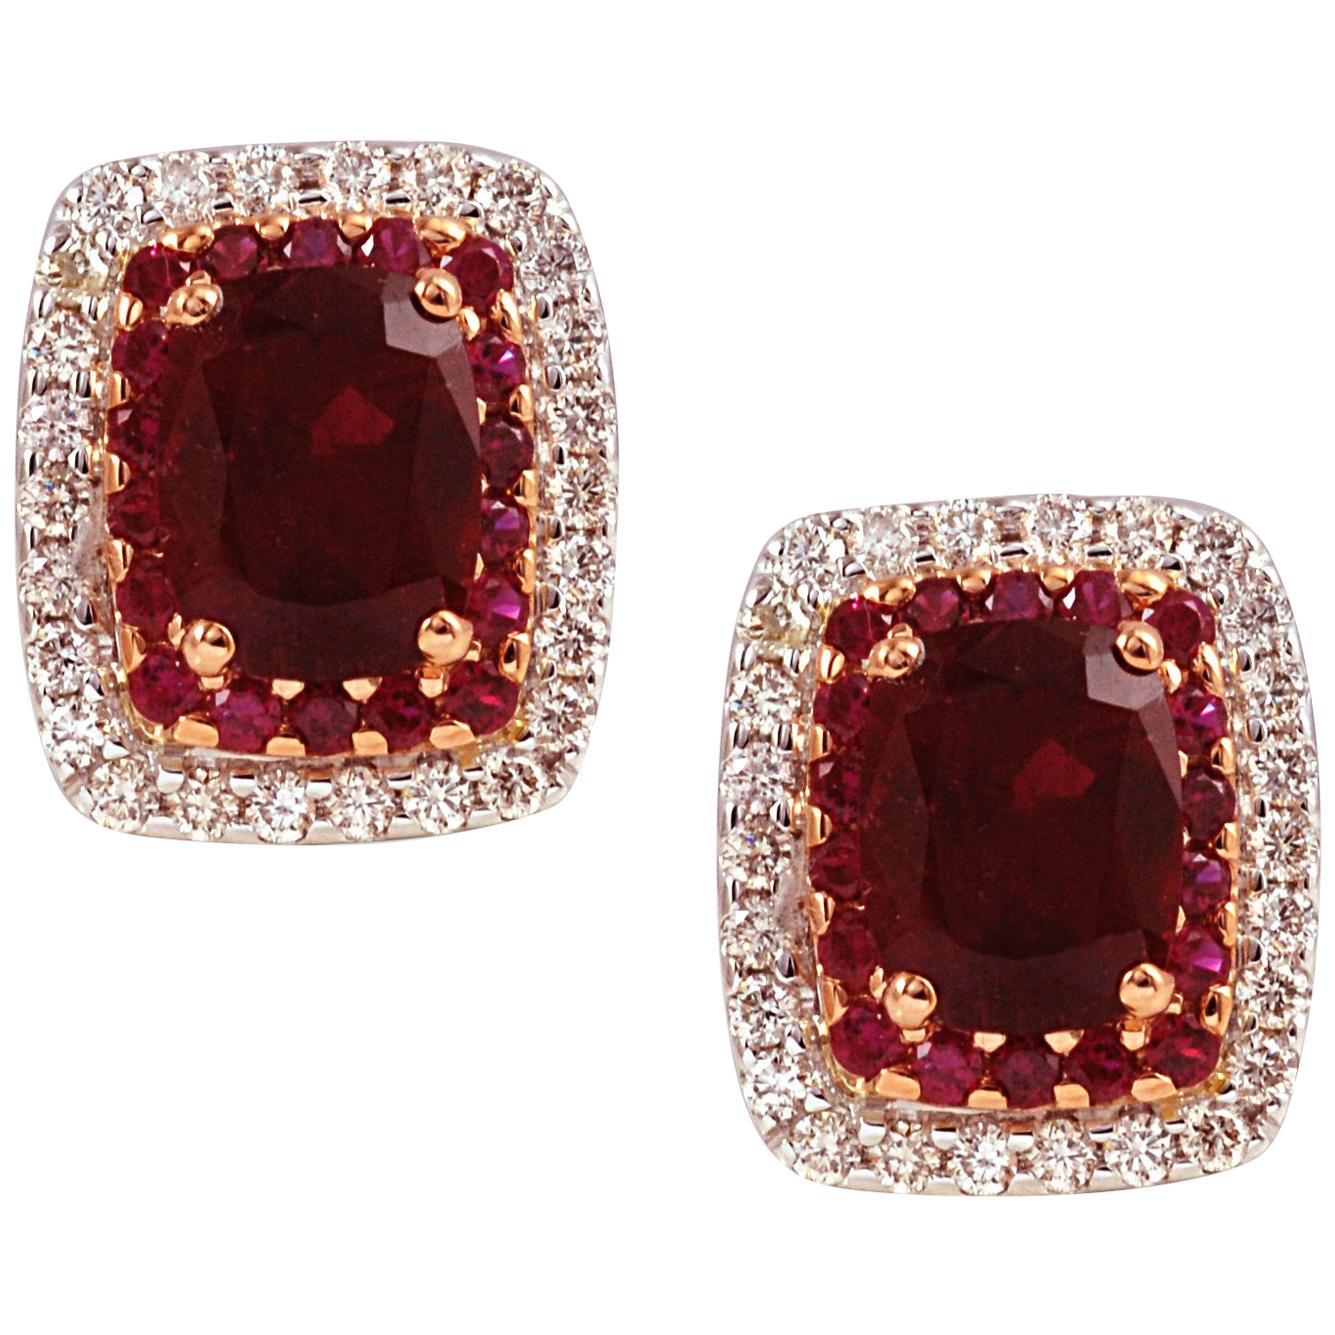 Rubellite 3.70 cts, Ruby 0.71 ct, Diamond 0.84ct Earrings in 18 Karat White Gold For Sale